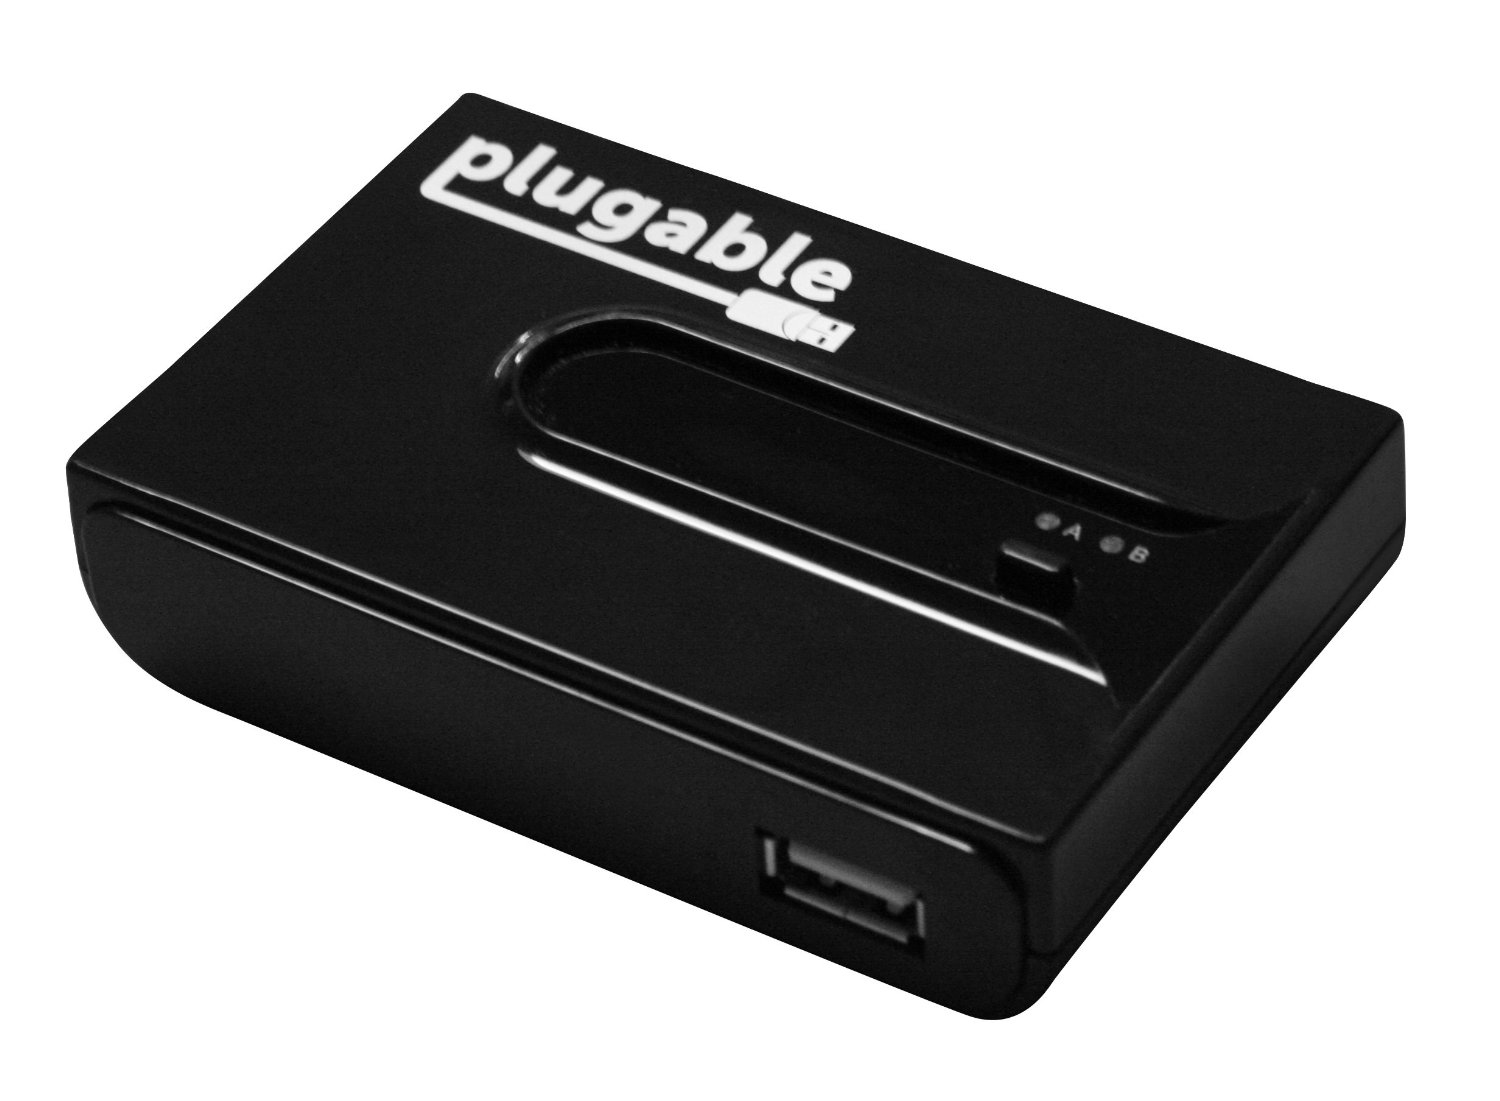 USB2-SWITCH2 PLUGABLE TECHNOLOGIES PLUGABLE USB 2.0 SWITCH FOR ONE-BUTTON USB DEVICE PORT SHARING BETWEEN TWO COMPU